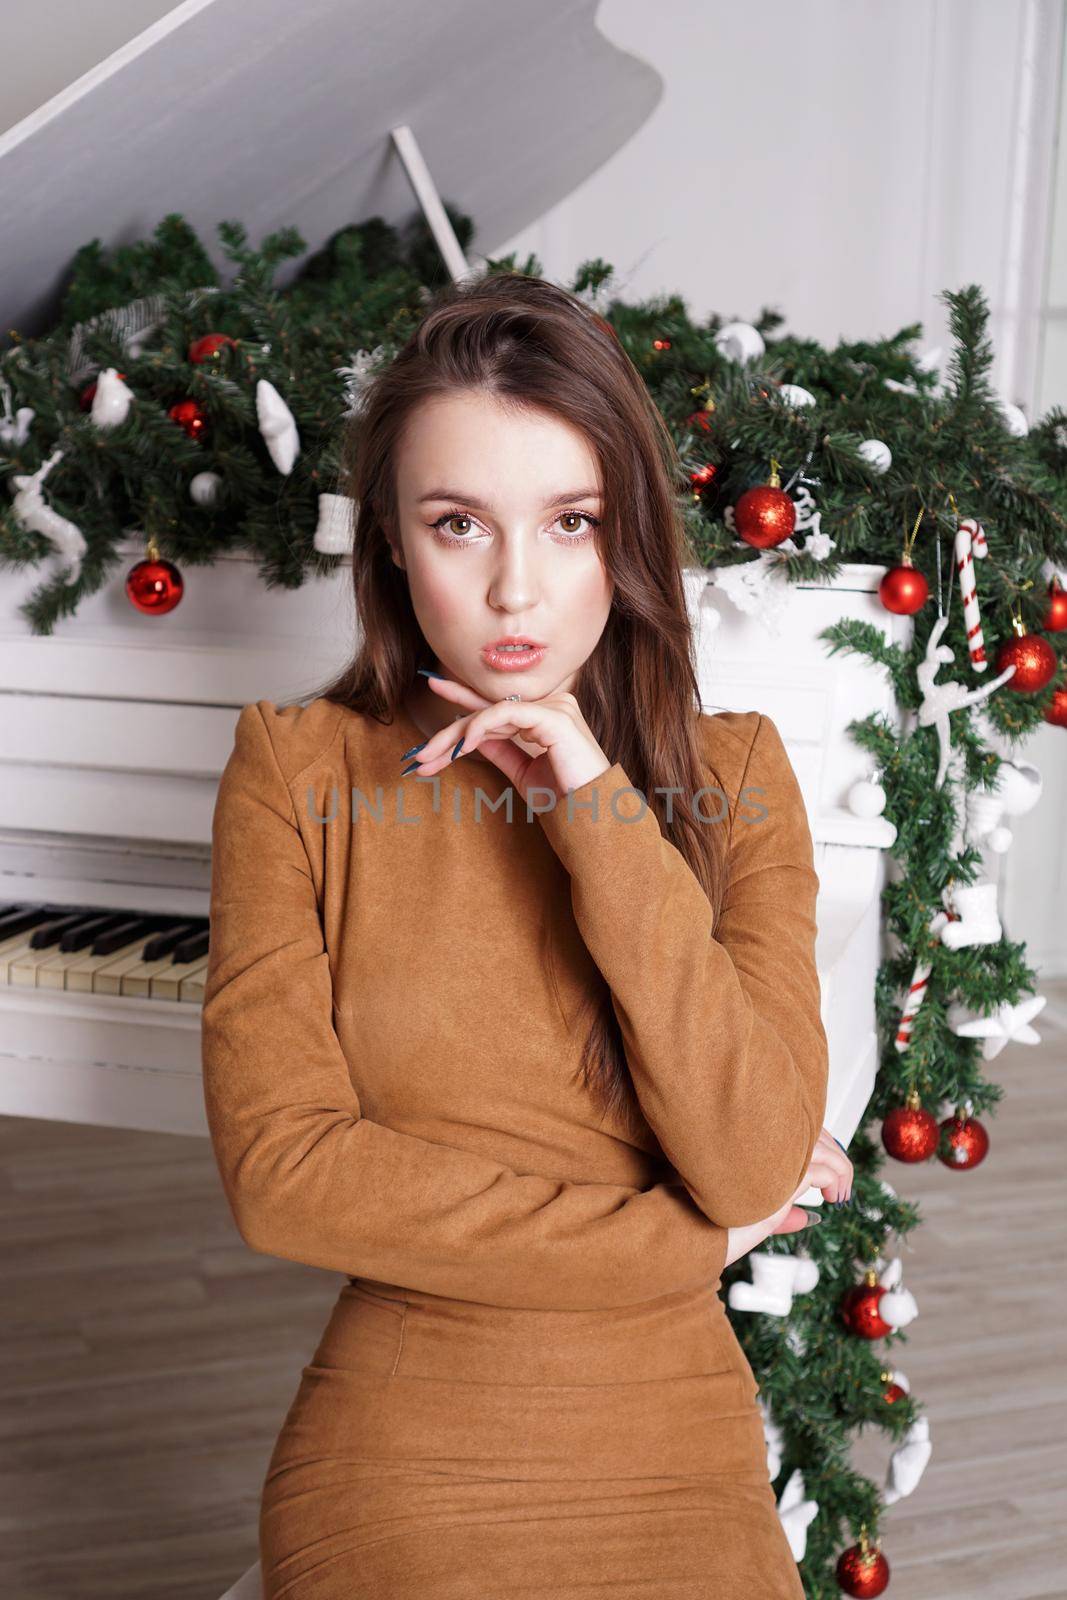 Beautiful girl with long blond hair near a white grand piano with christmas decor